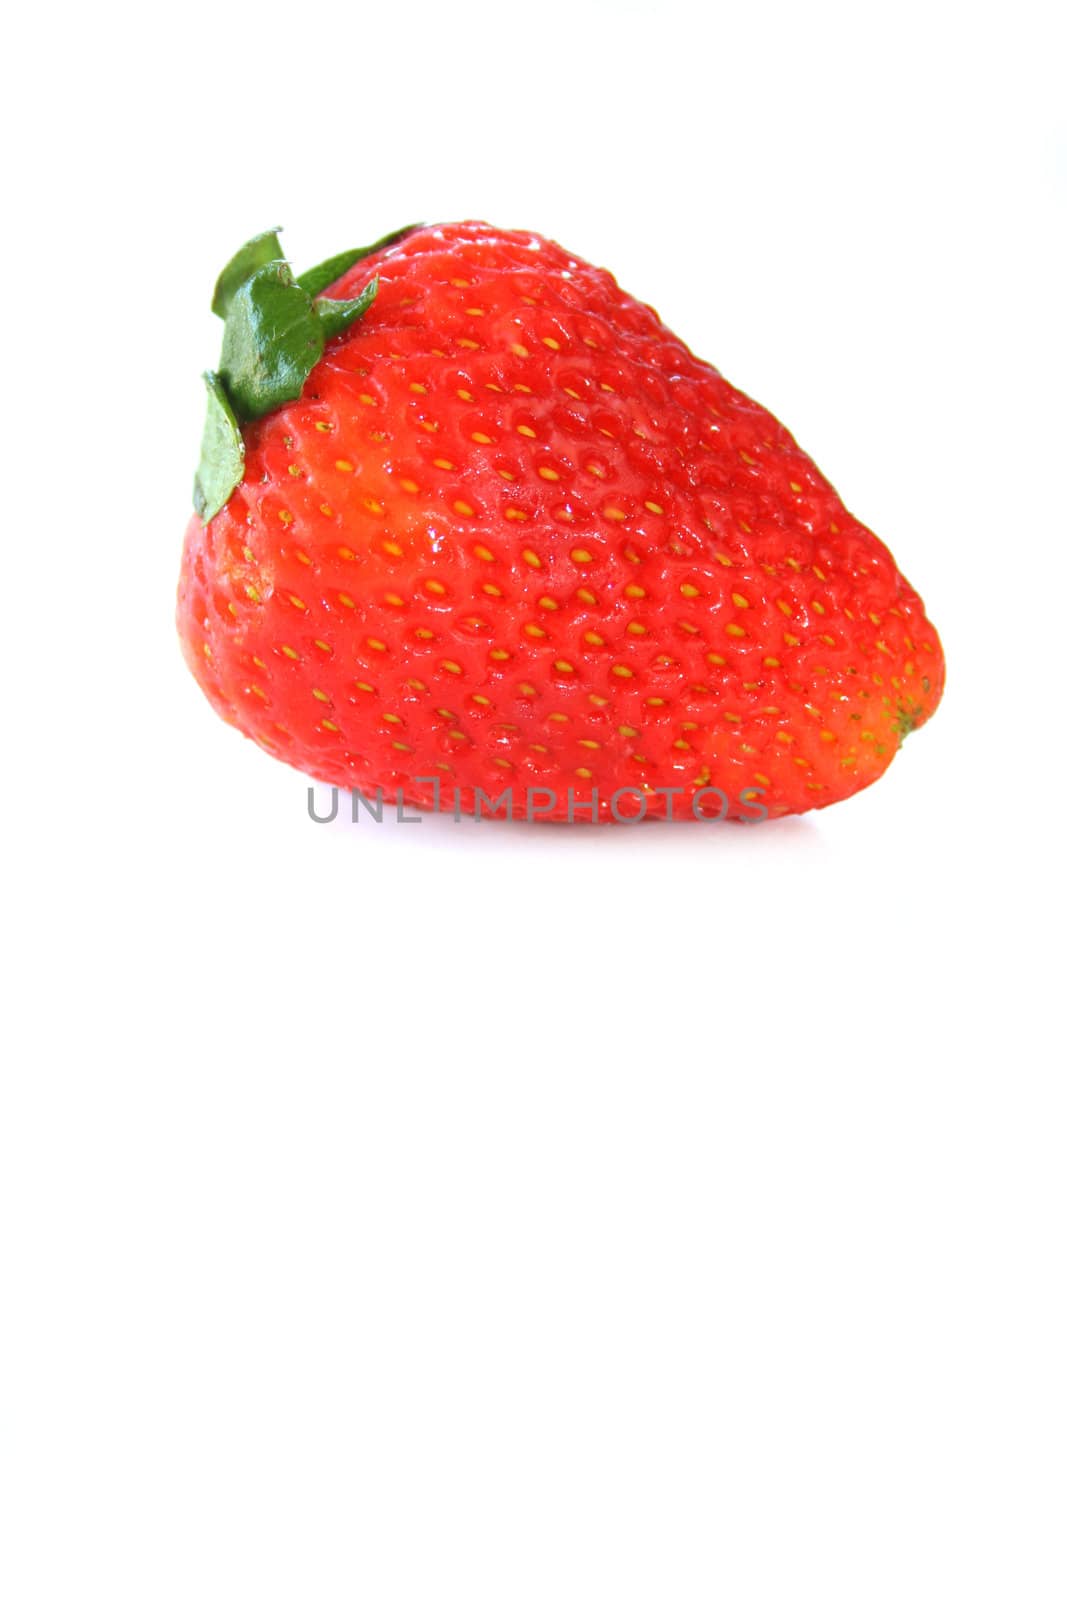 a fresh strawberry that has just been washed, isolated on a white background. Copy space available.